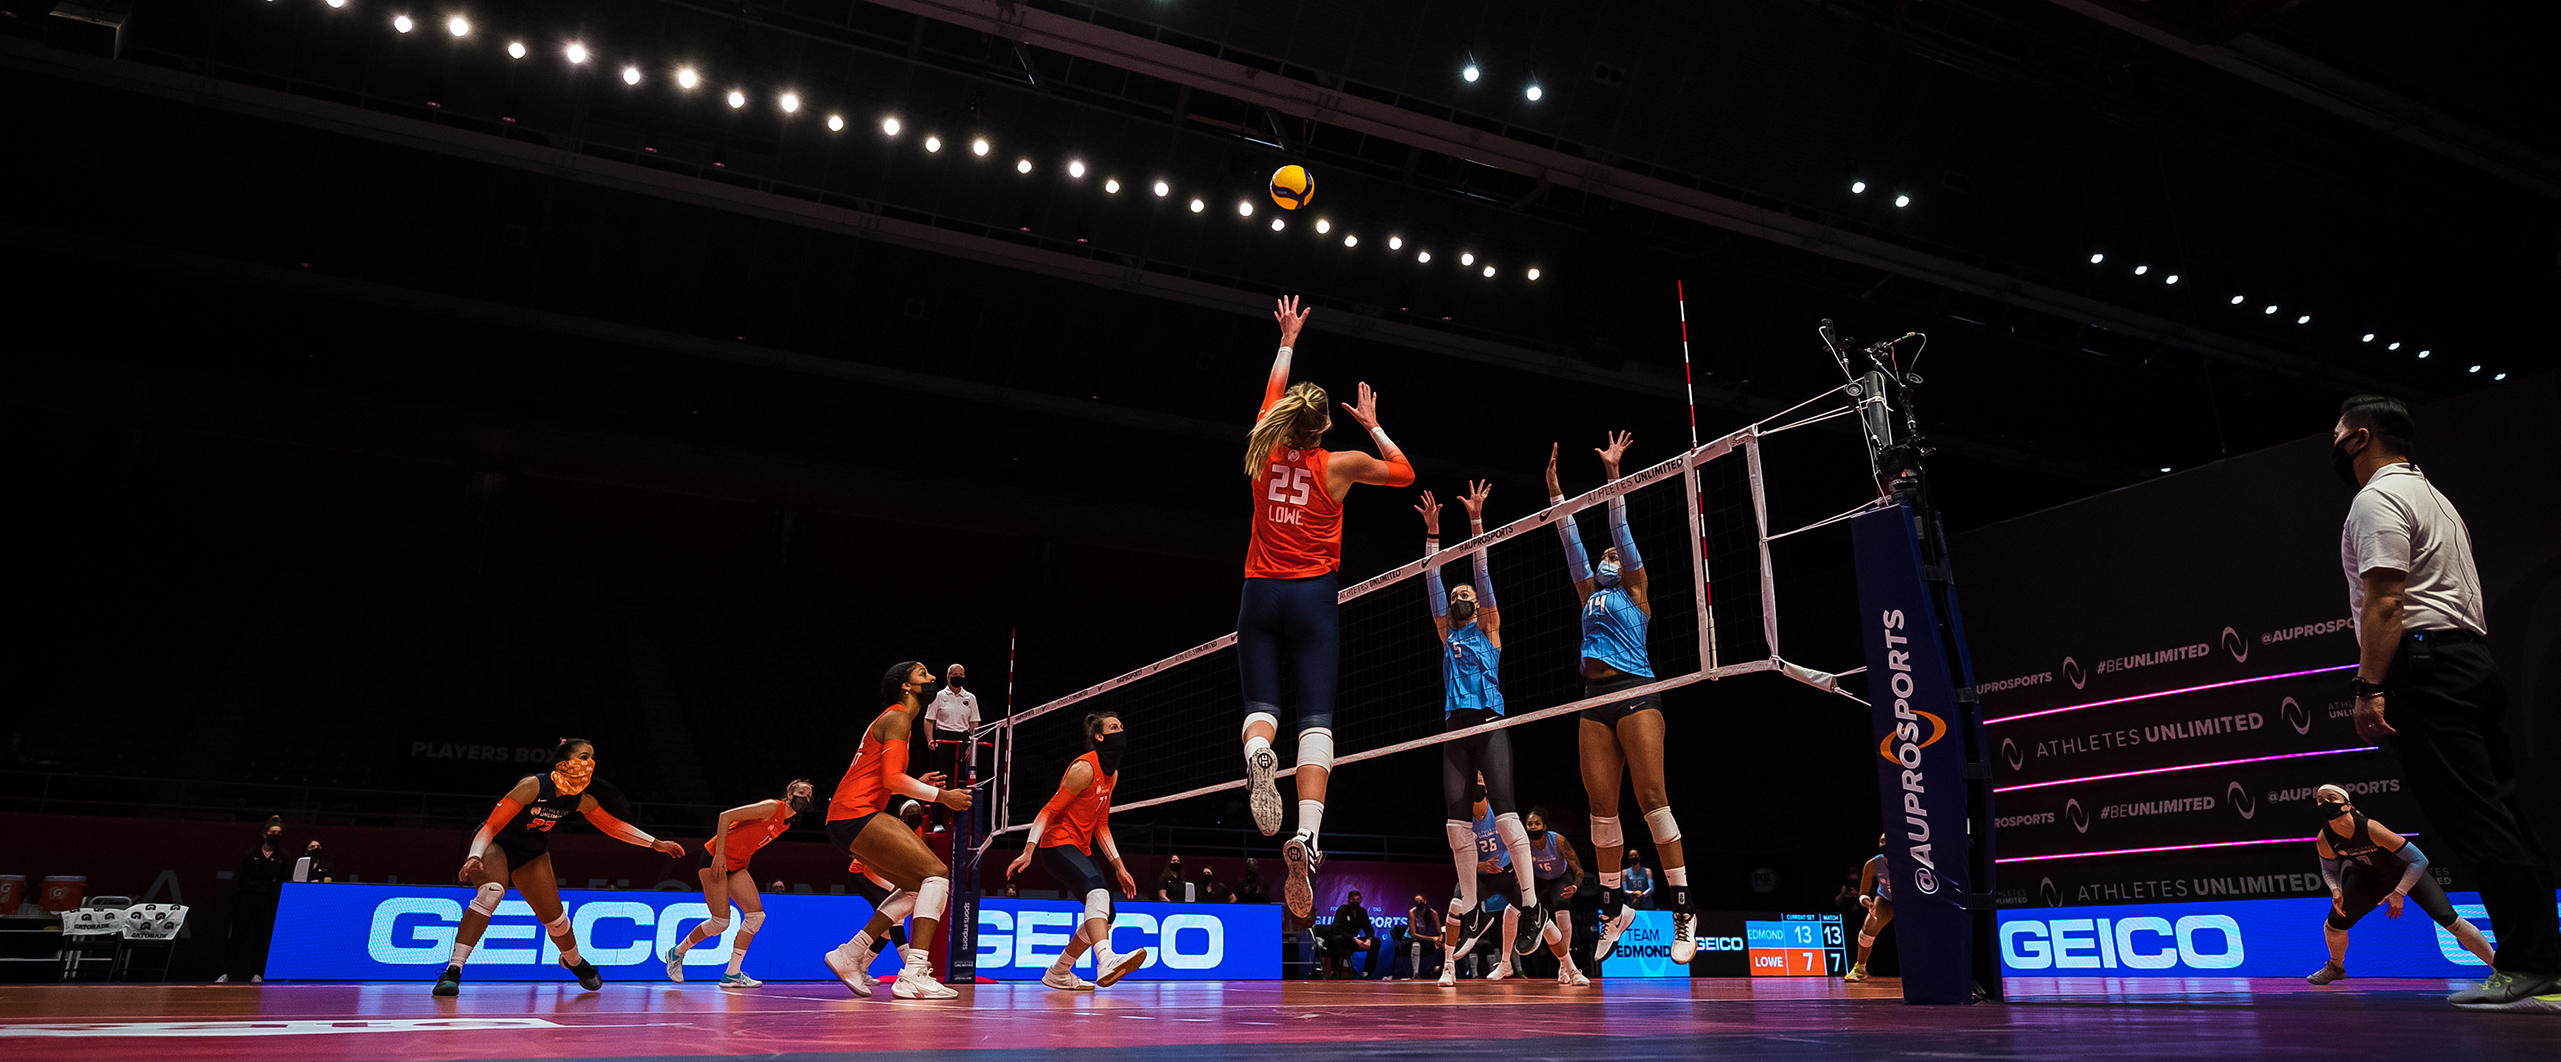 Volleyball Media Center | Athletes Unlimited